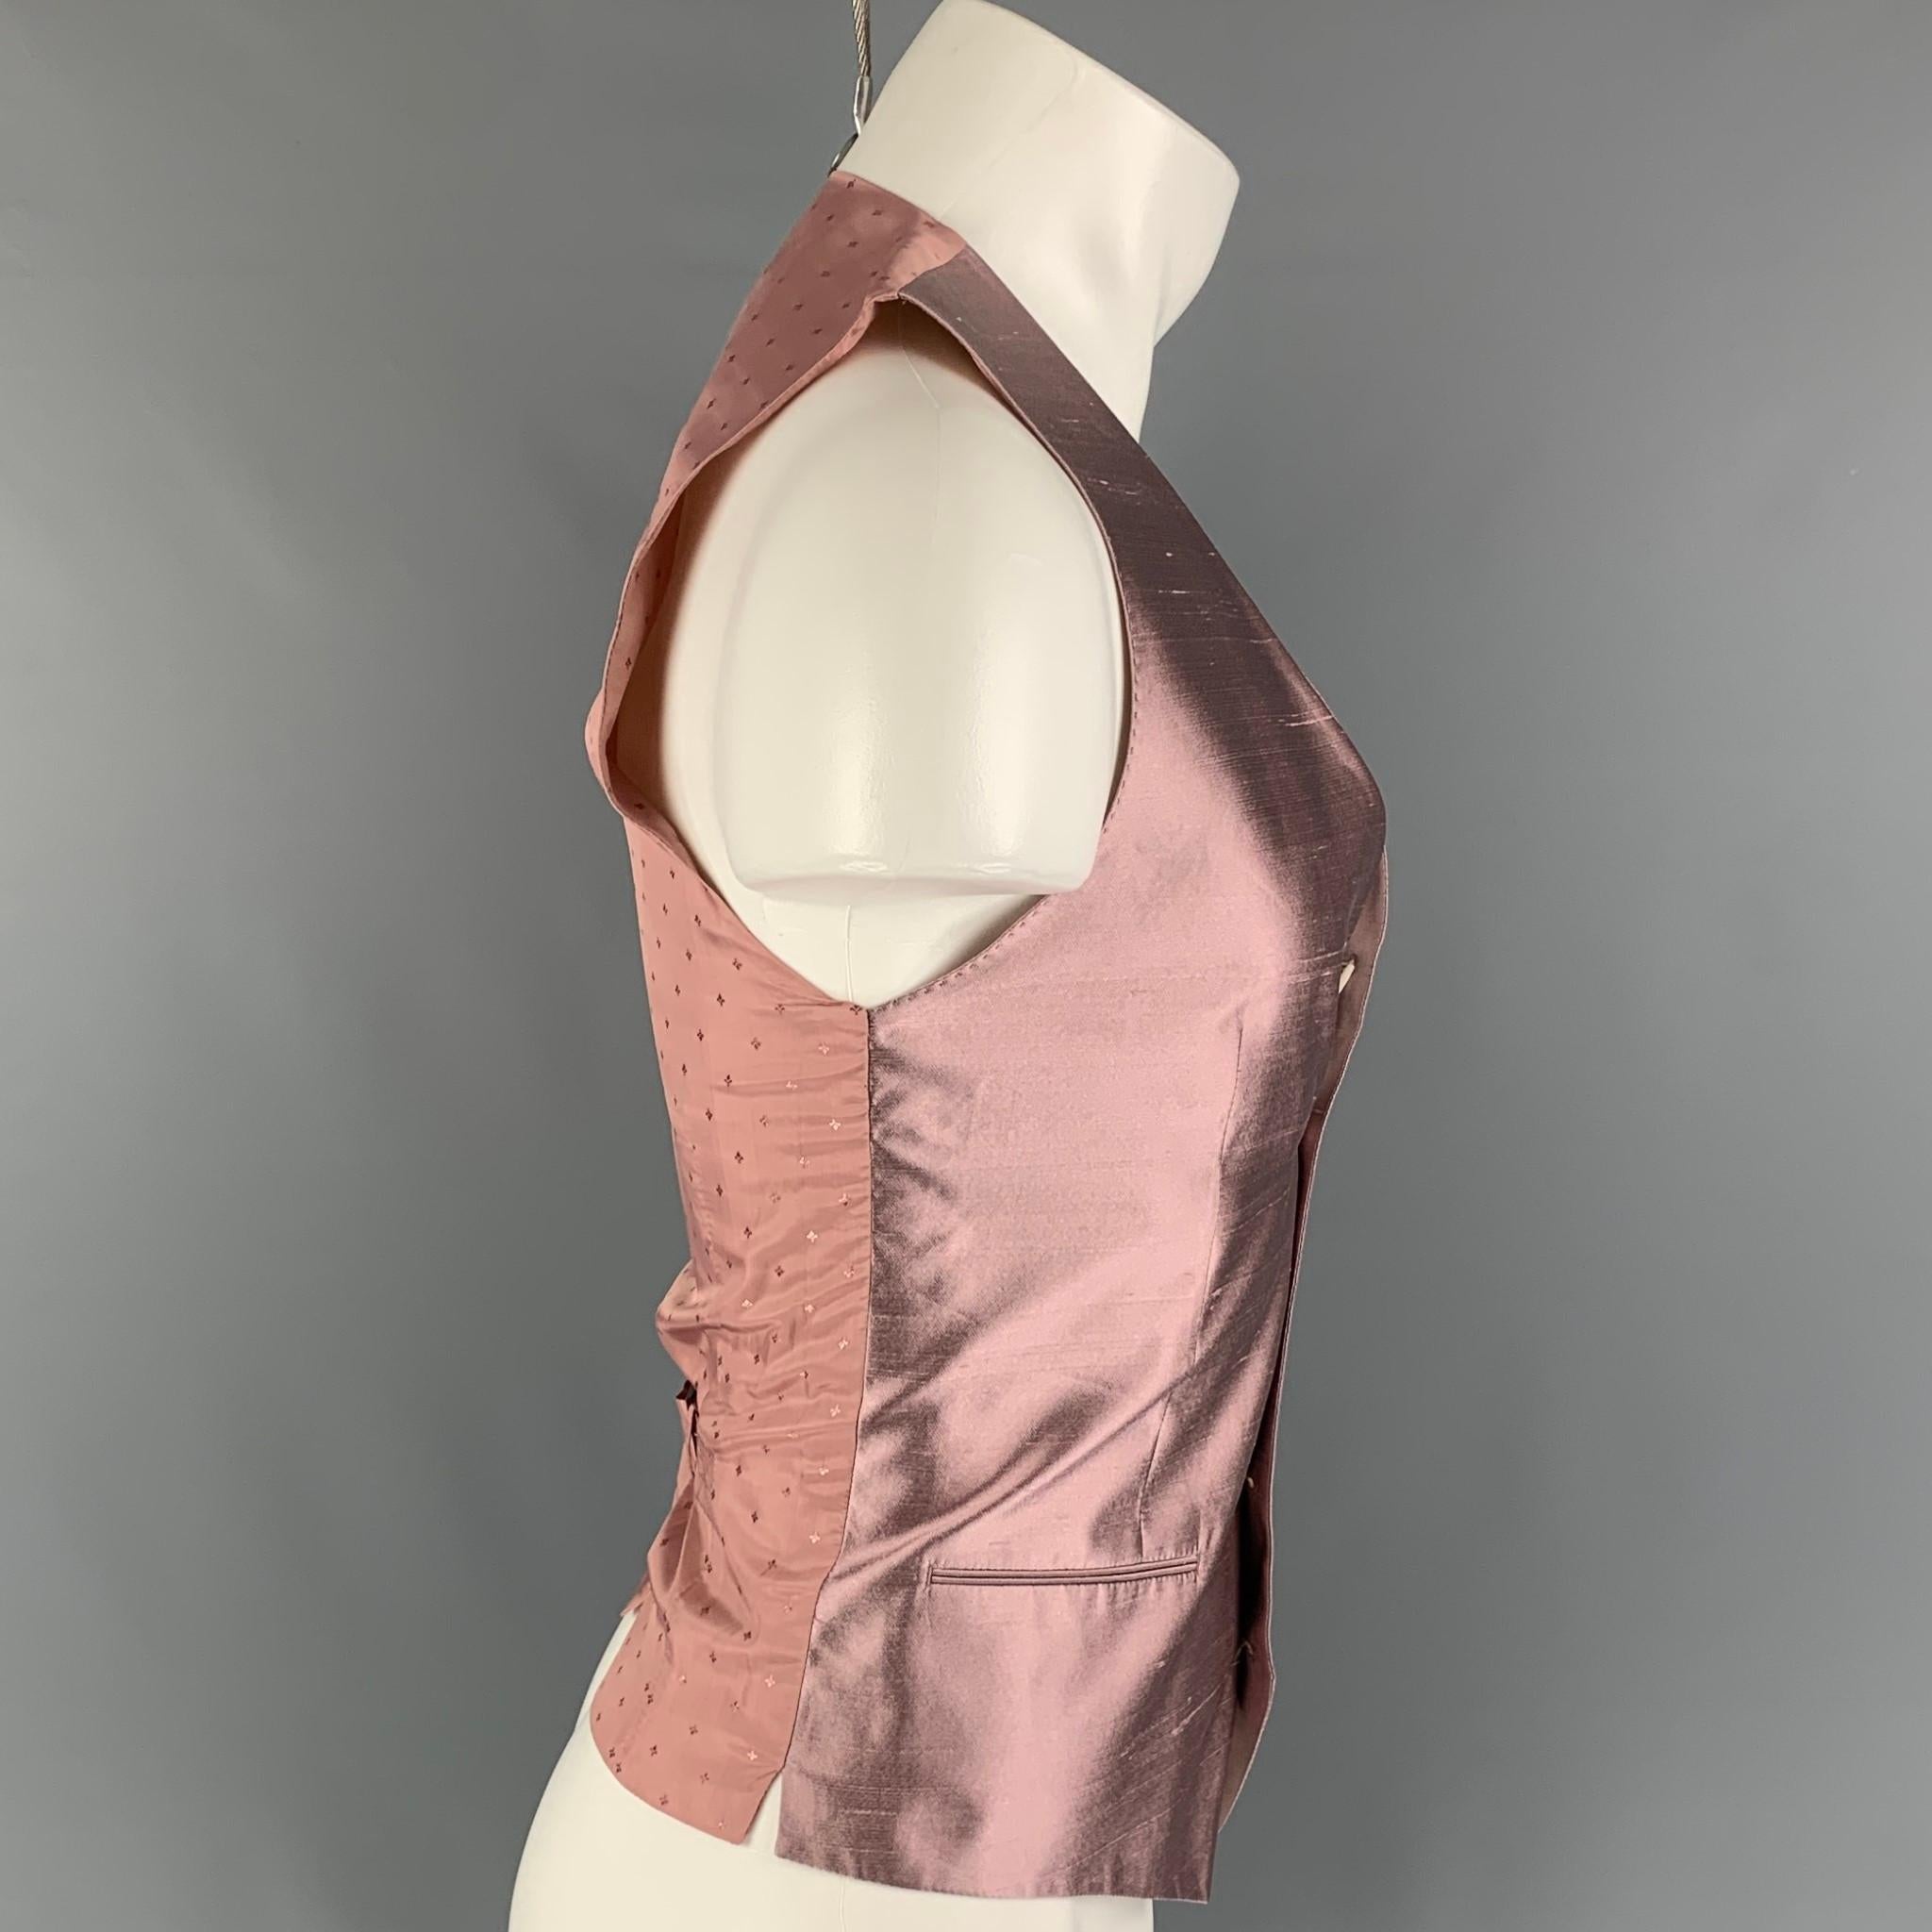 DOLCE & GABBANA vest comes in a mauve silk featuring a back belt strap, slit pockets, and a buttoned closure. Made in Italy. 

Very Good Pre-Owned Condition.
Marked: 46

Measurements:

Shoulder: 13.75 in.
Chest: 35 in.
Length: 23 in. 